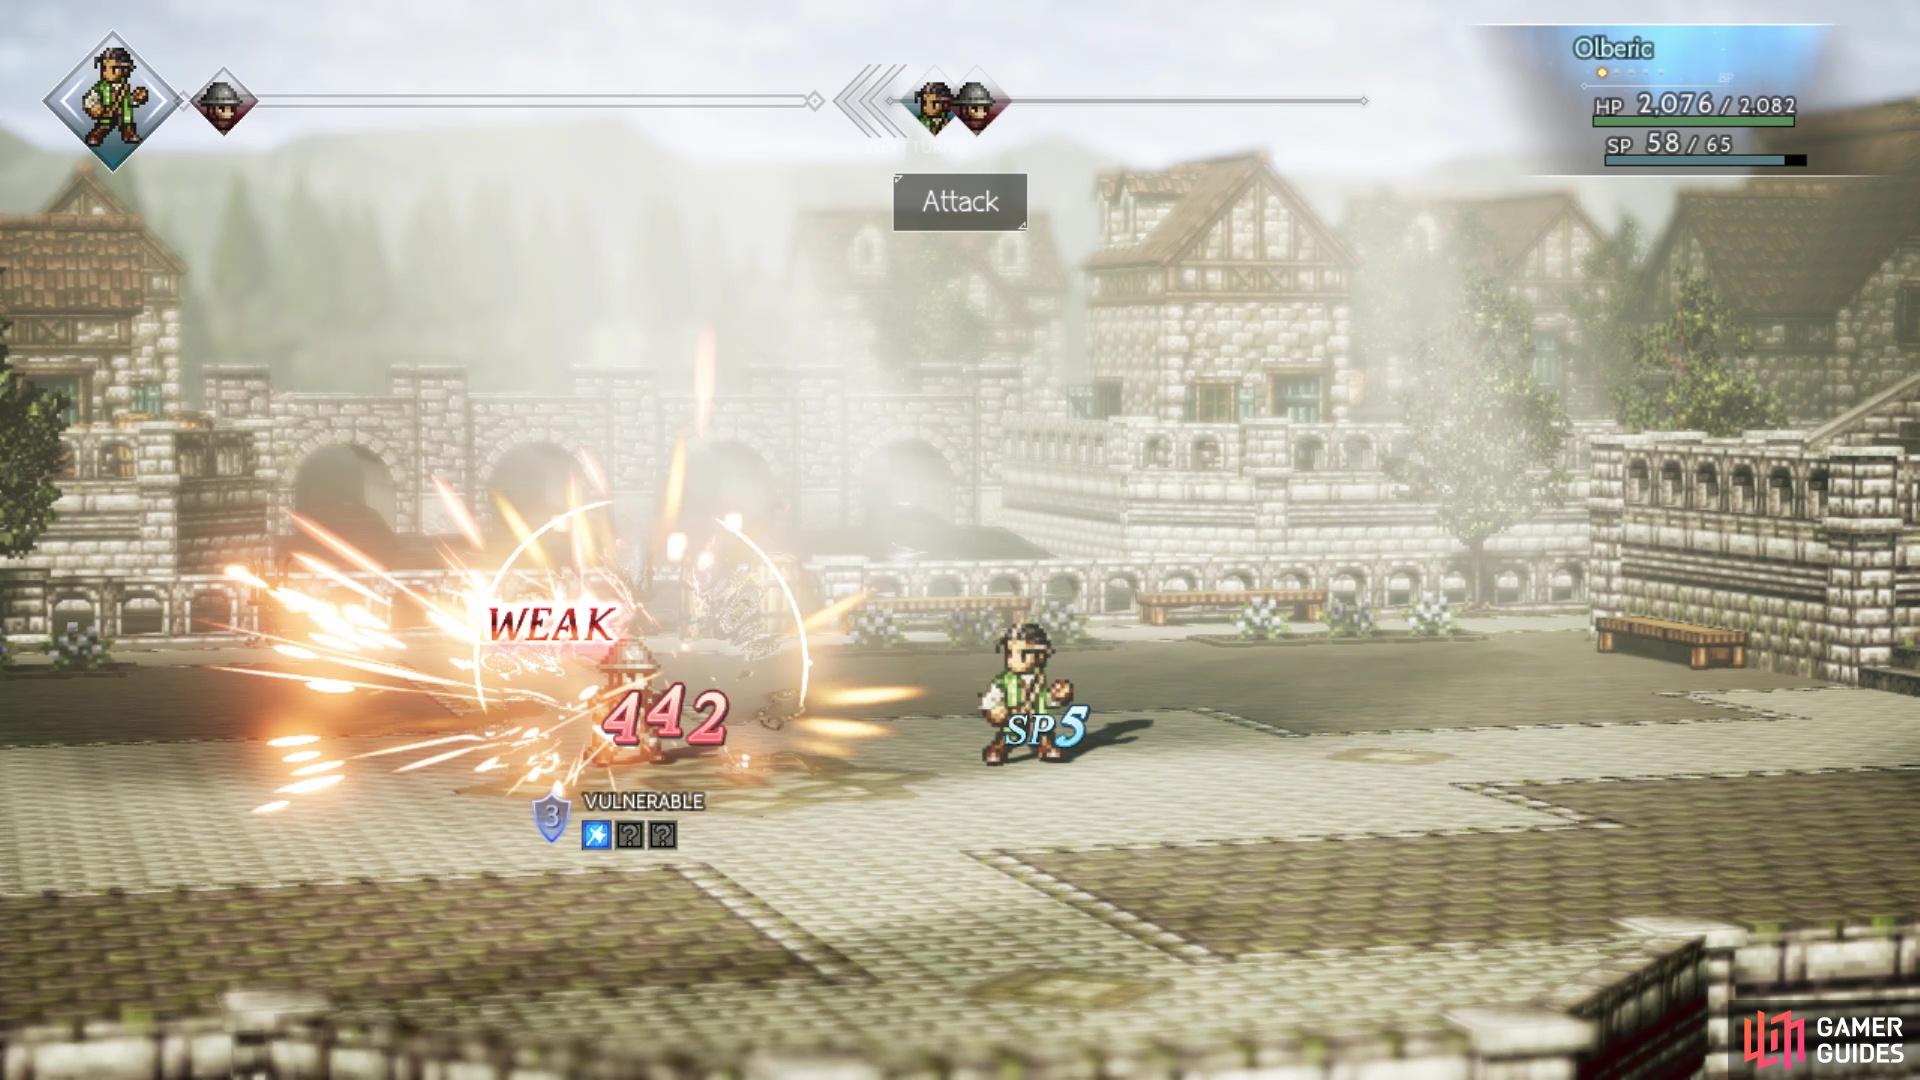 Olberic has an easier time in this duel